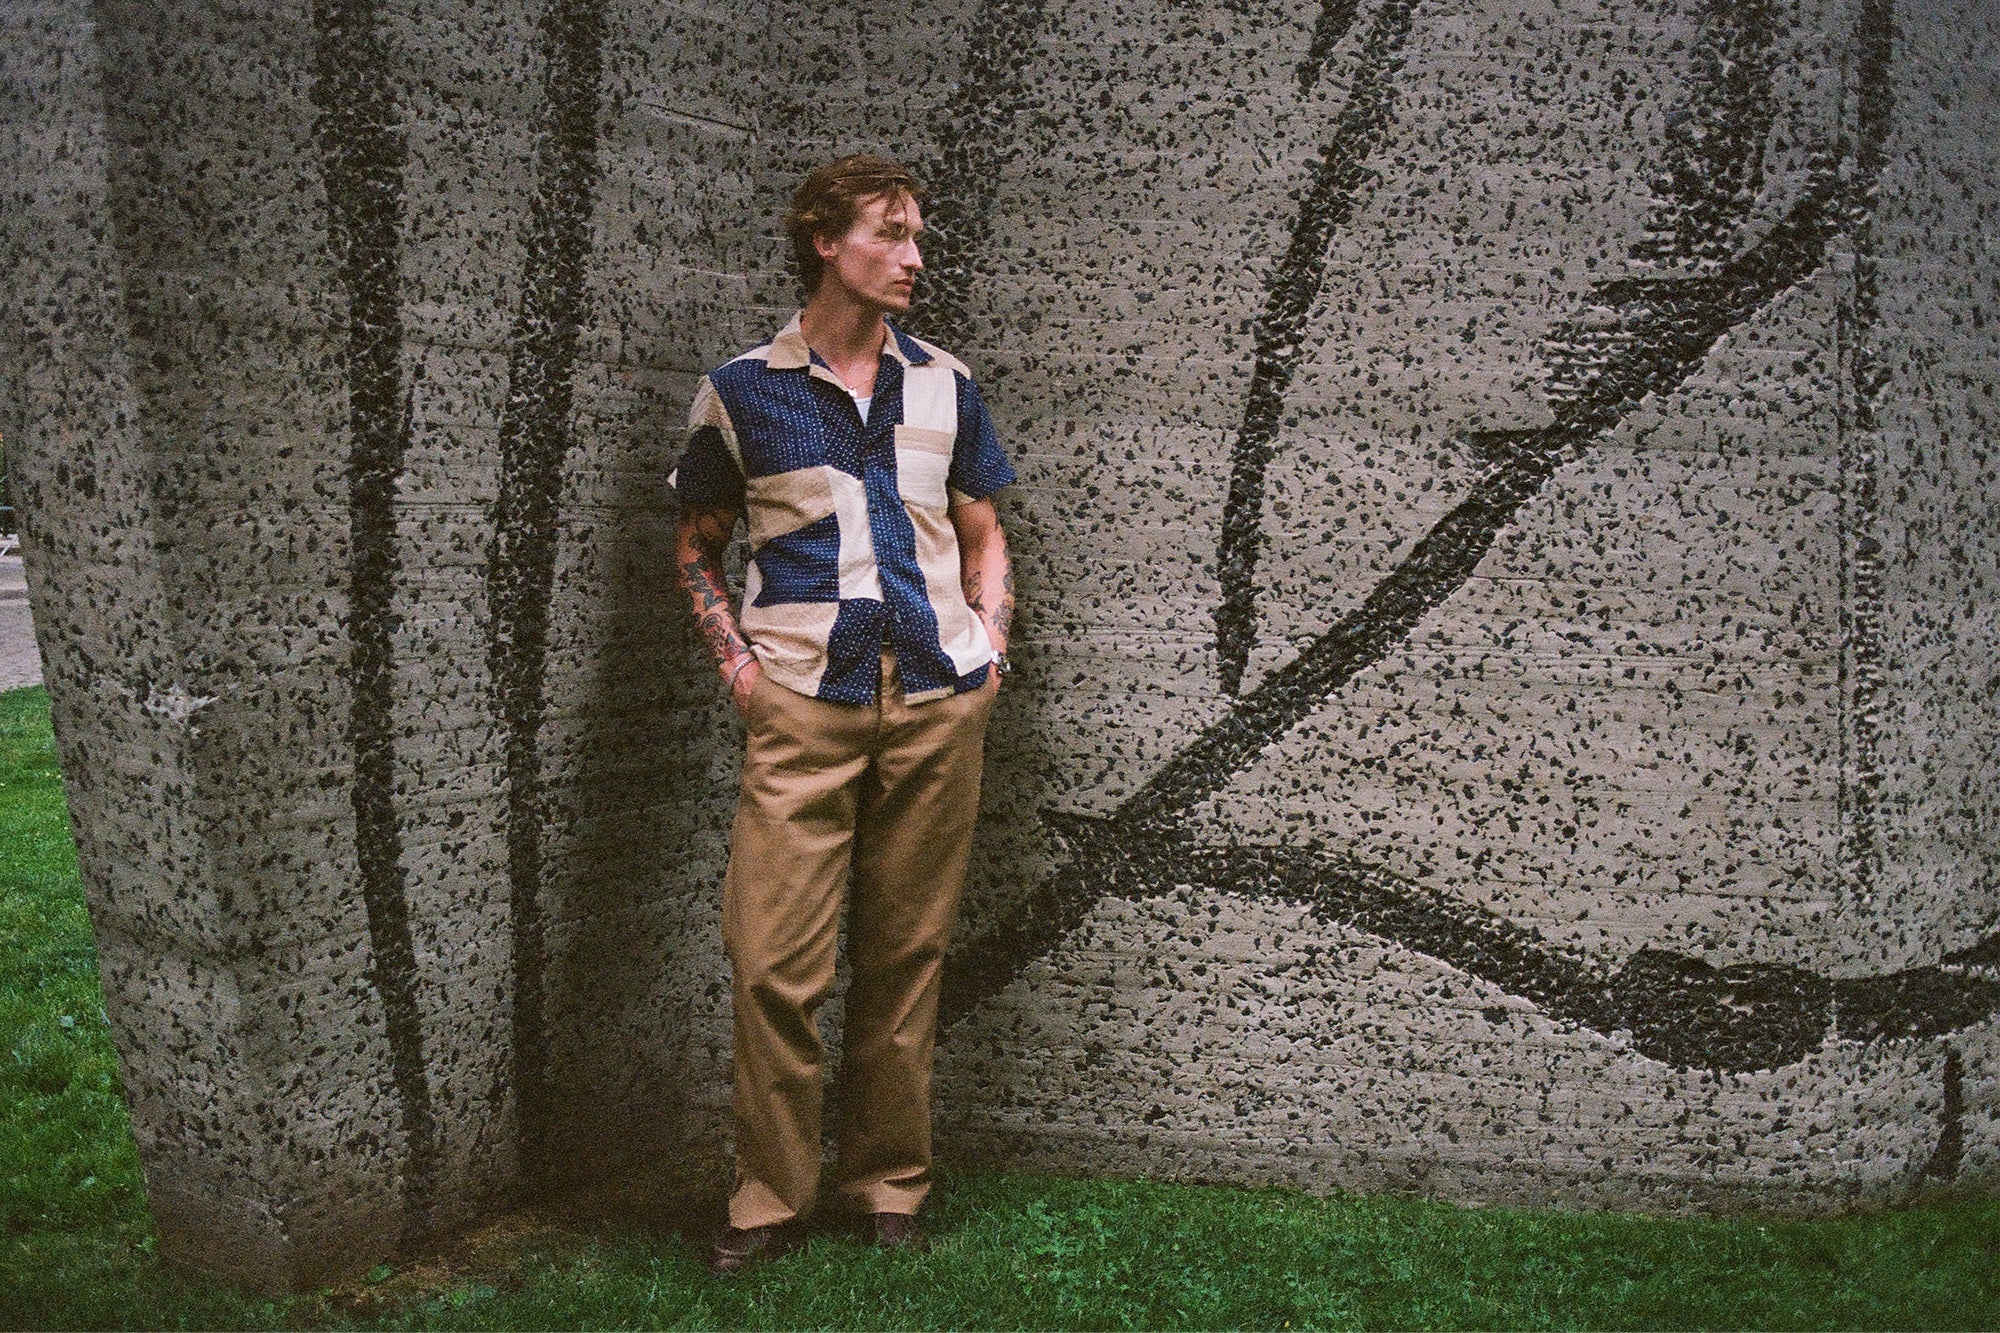 A handsome man in a patchwork shirt stands against a concrete wall.